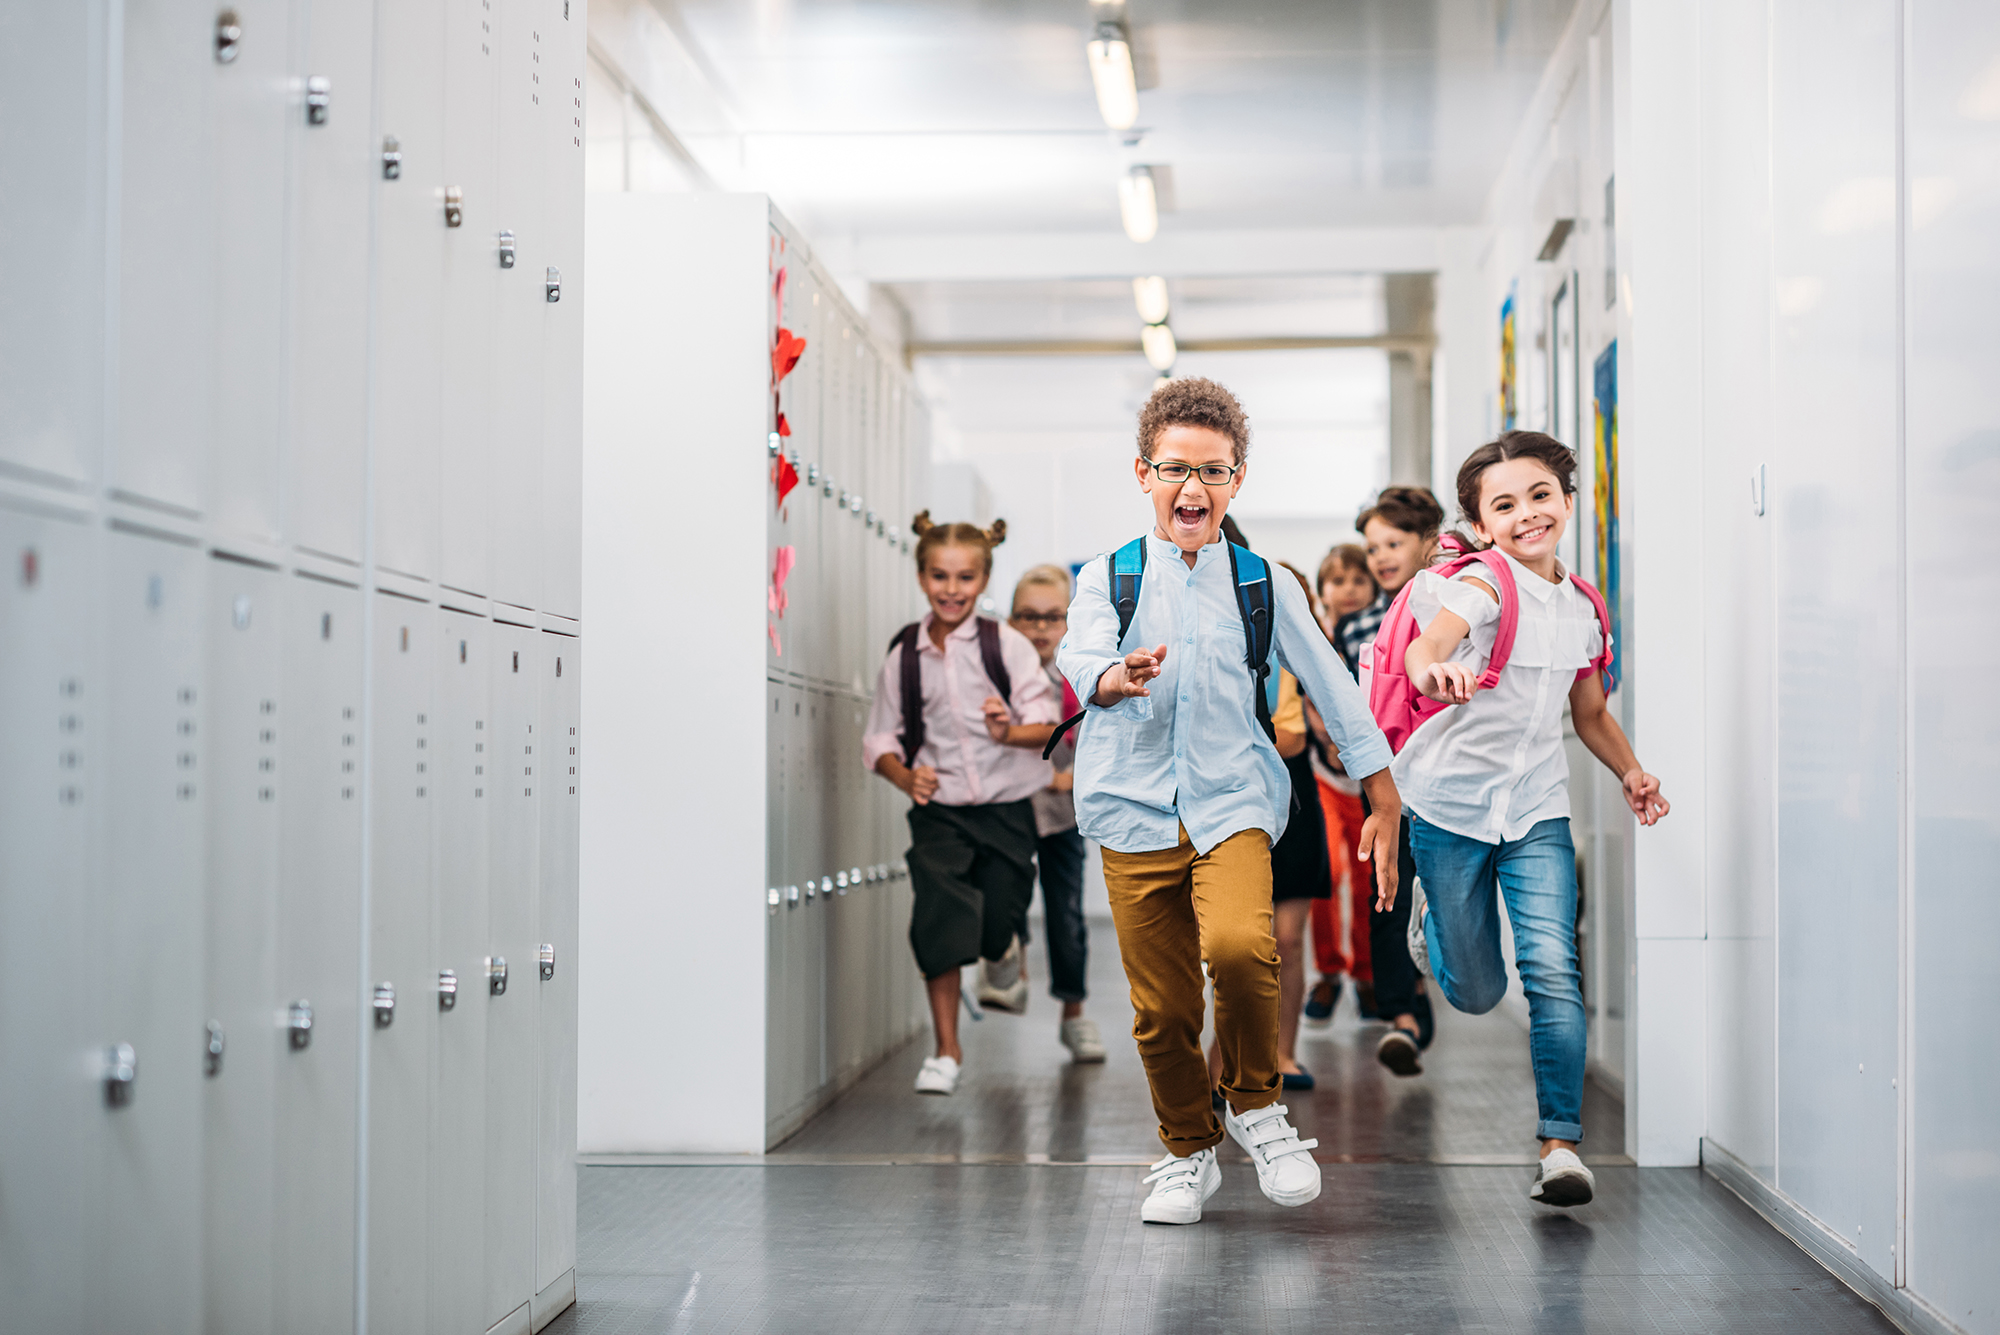 Group of students running down a school hallway, lined with lockers.